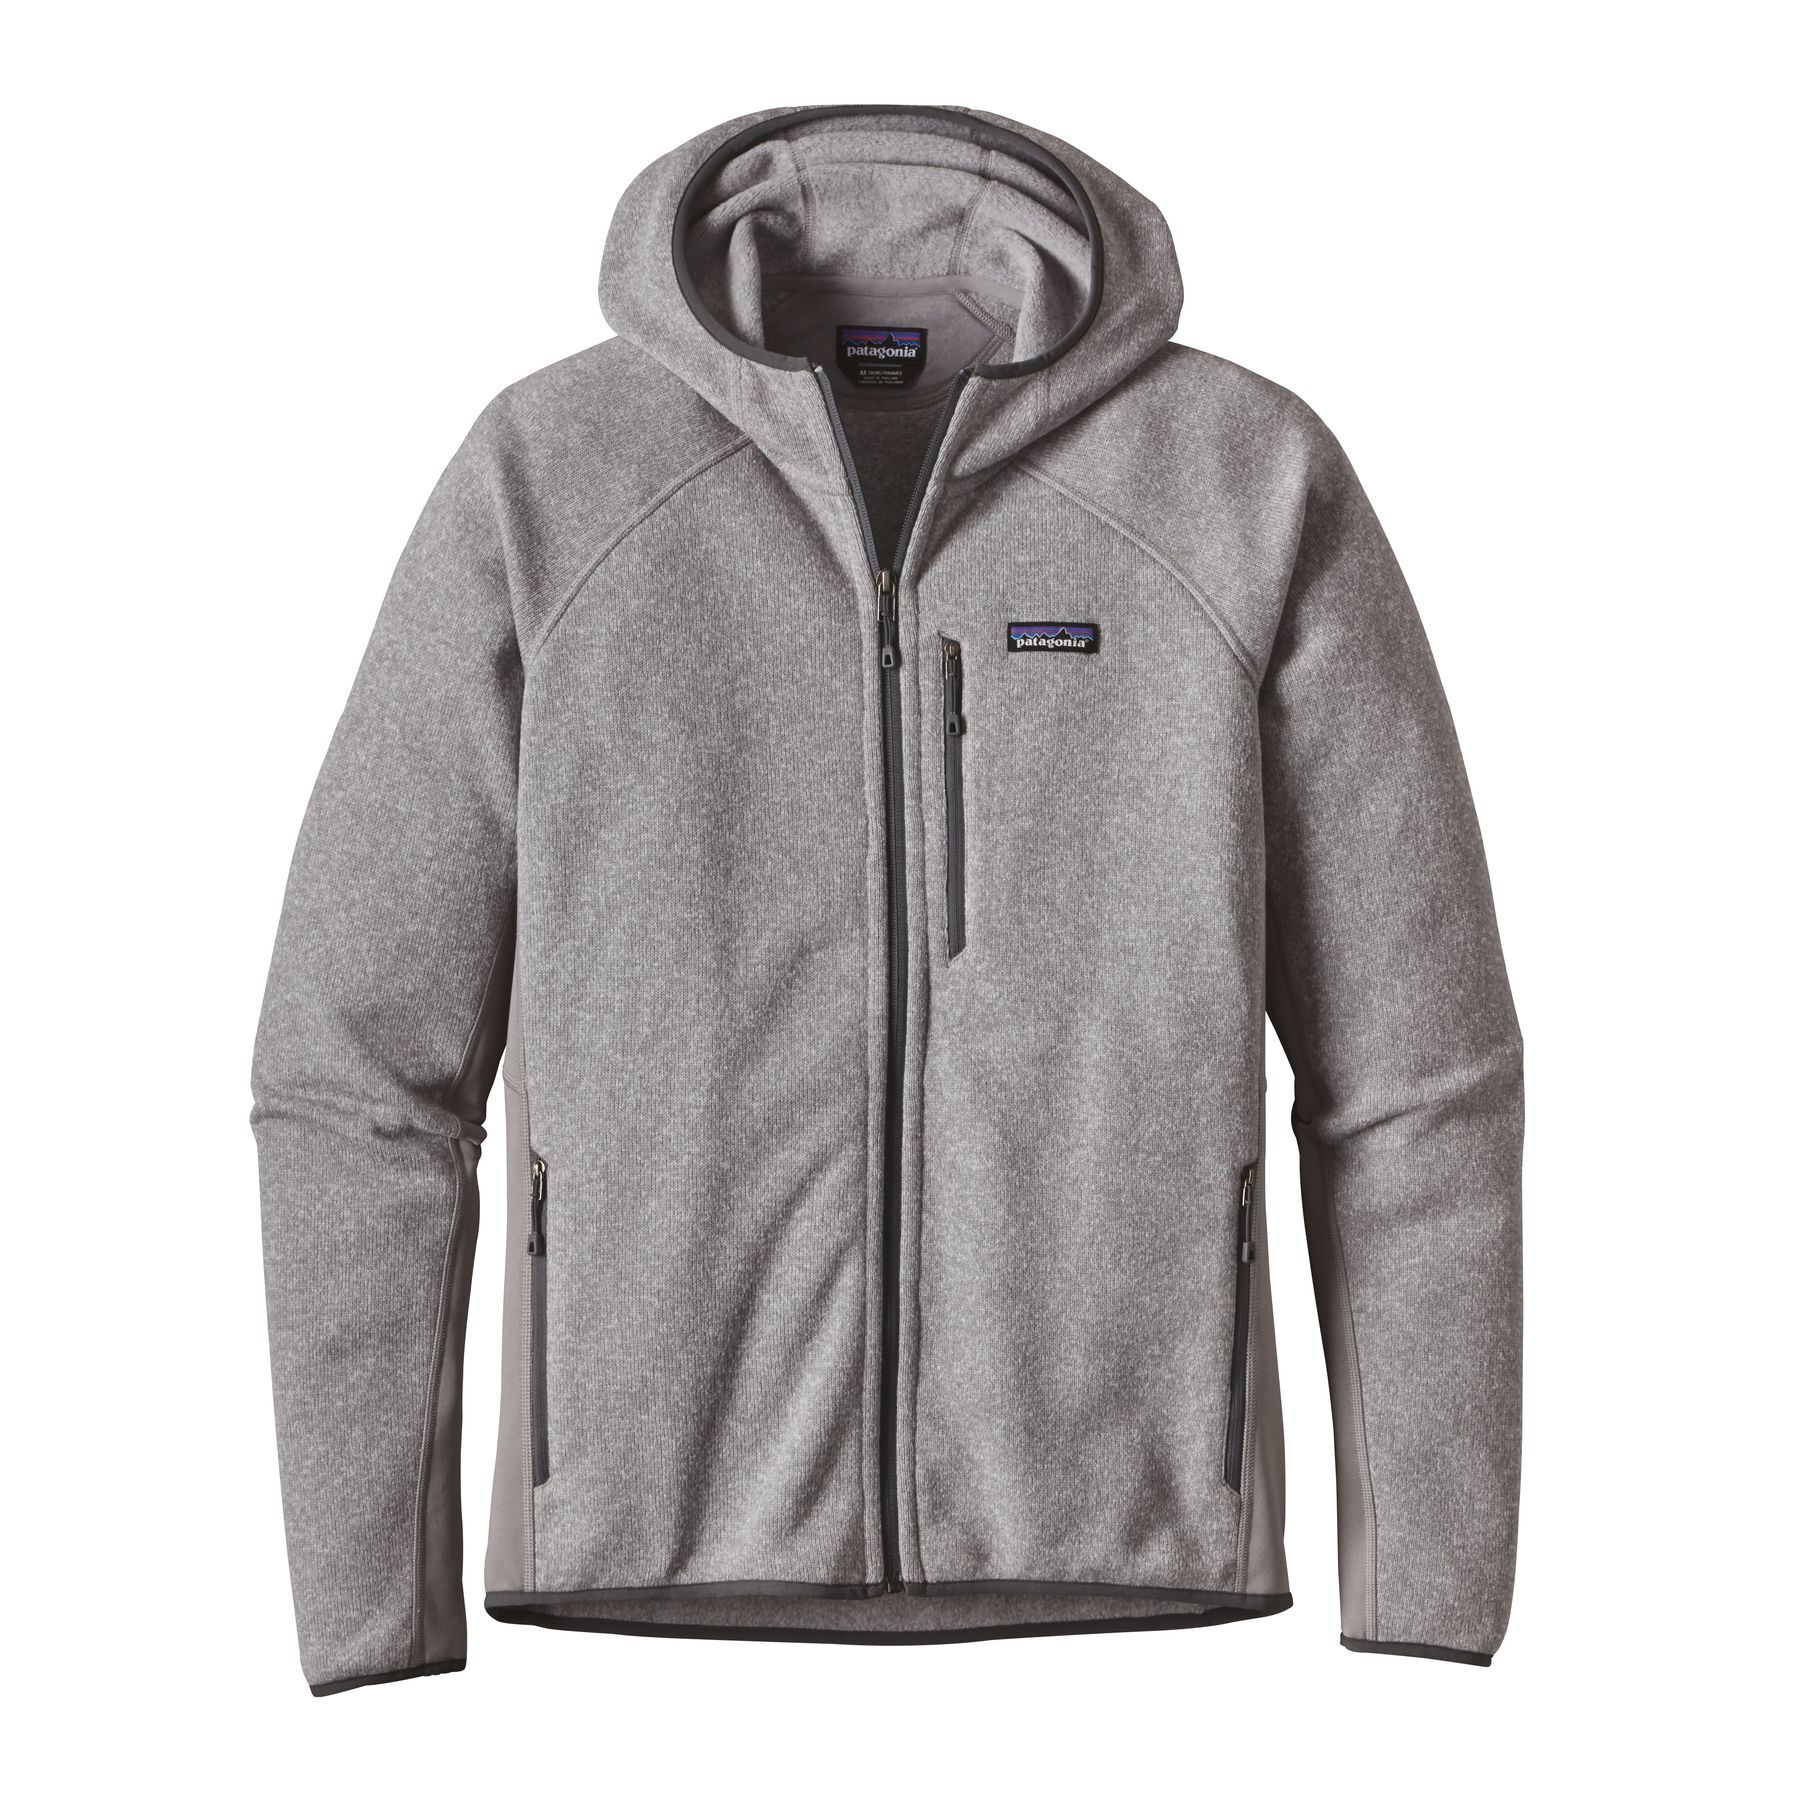 Patagonia - Performance Better Sweater Hoody - Forro polar - Hombre